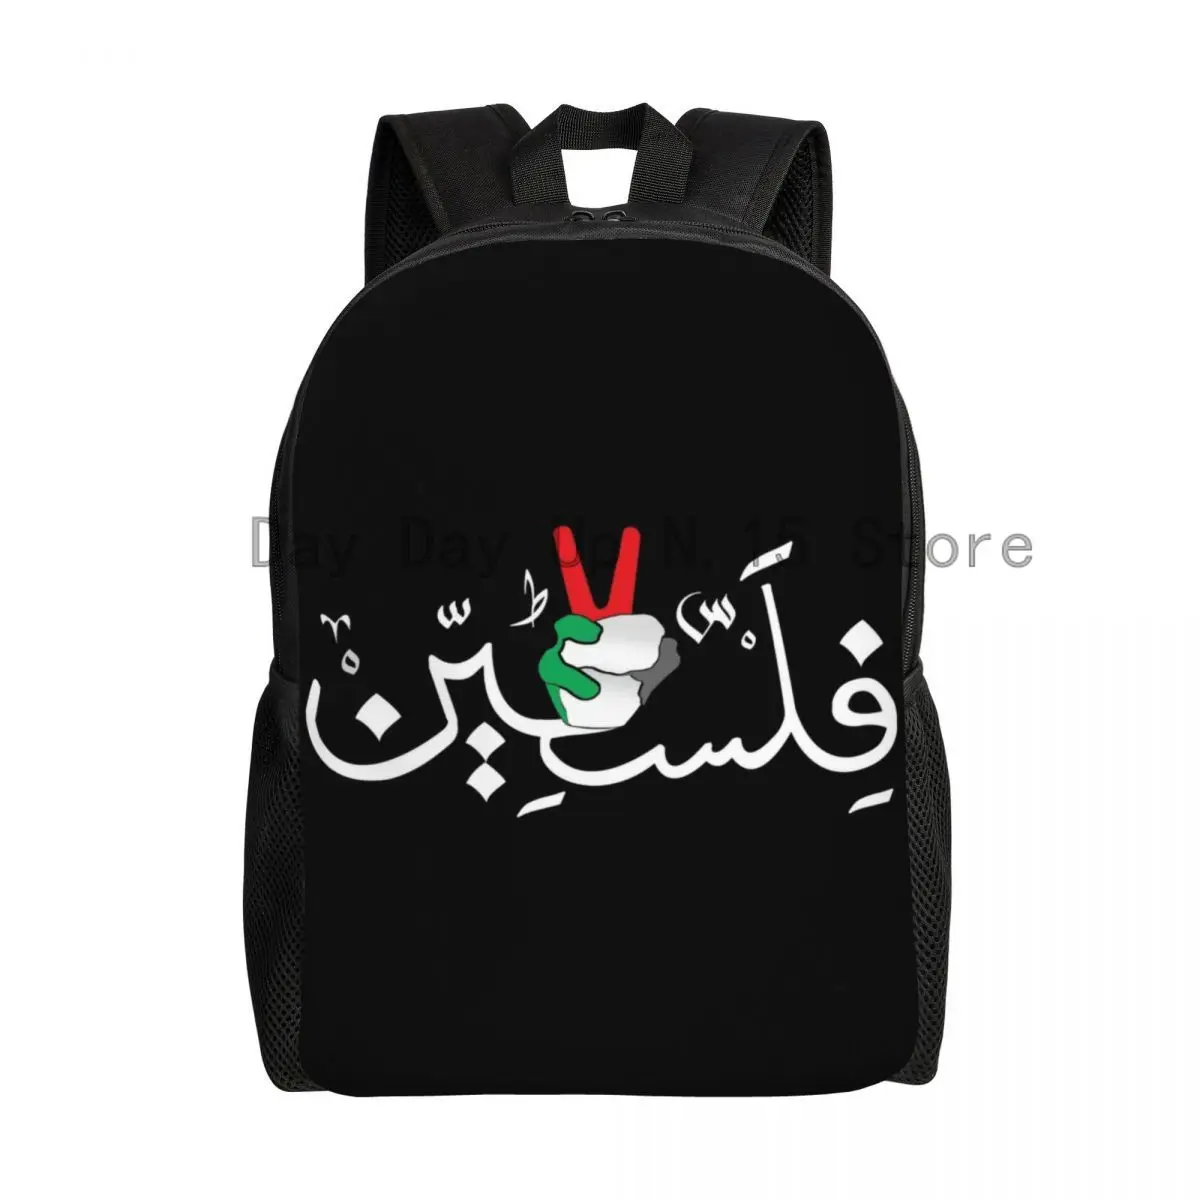 

Palestine Arabic Calligraphy Name With Palestinian Flag Hand Backpacks for School College Bookbag Fits 15 Inch Laptop Bags